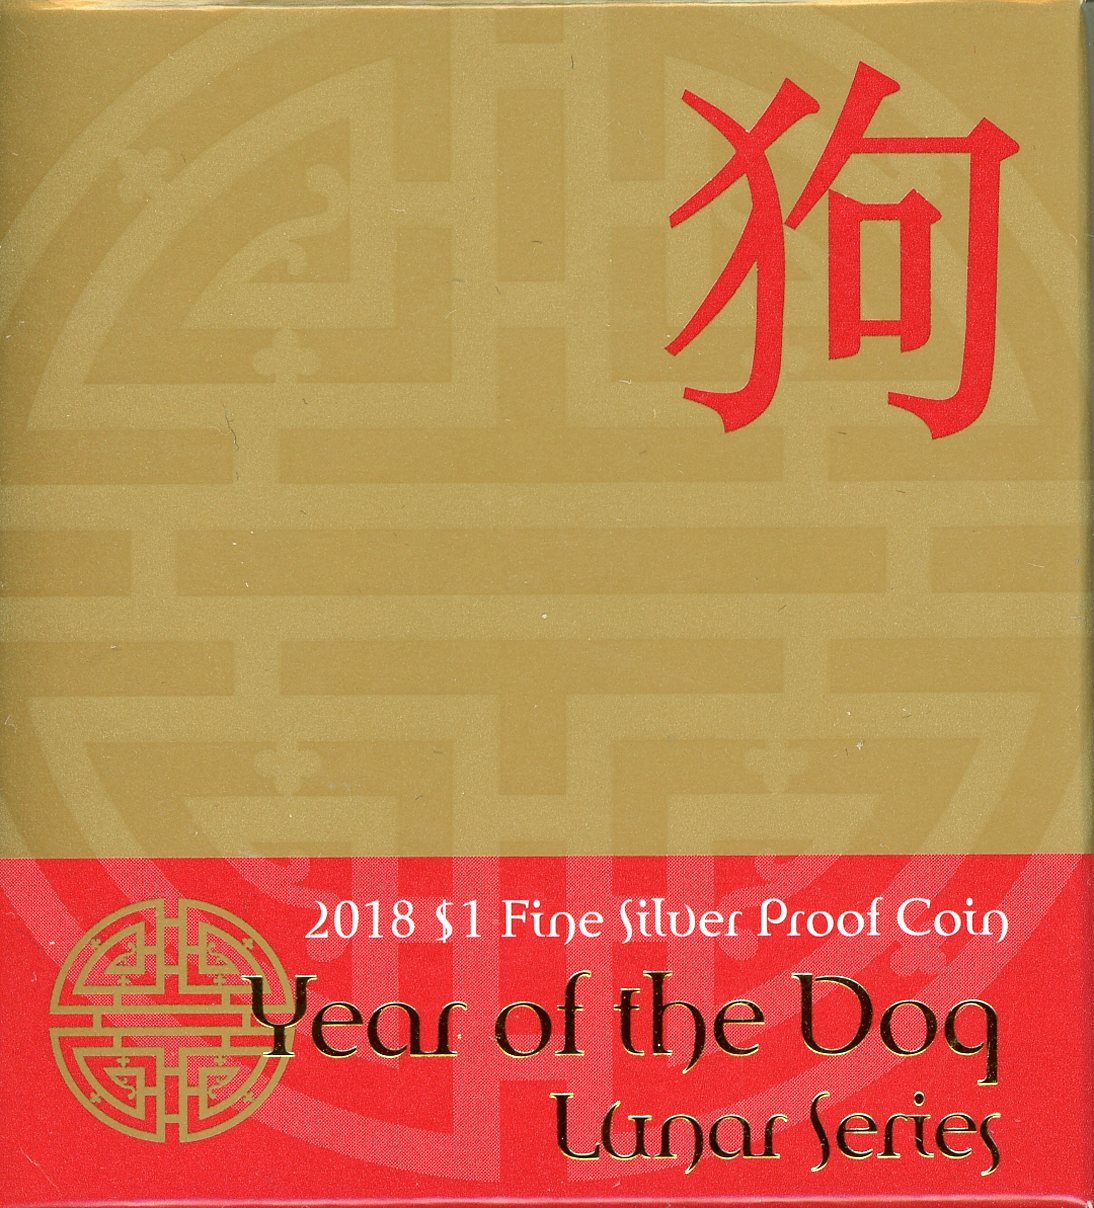 Thumbnail for 2018 Lunar Series - Year of the Dog $1 Silver Proof Coin